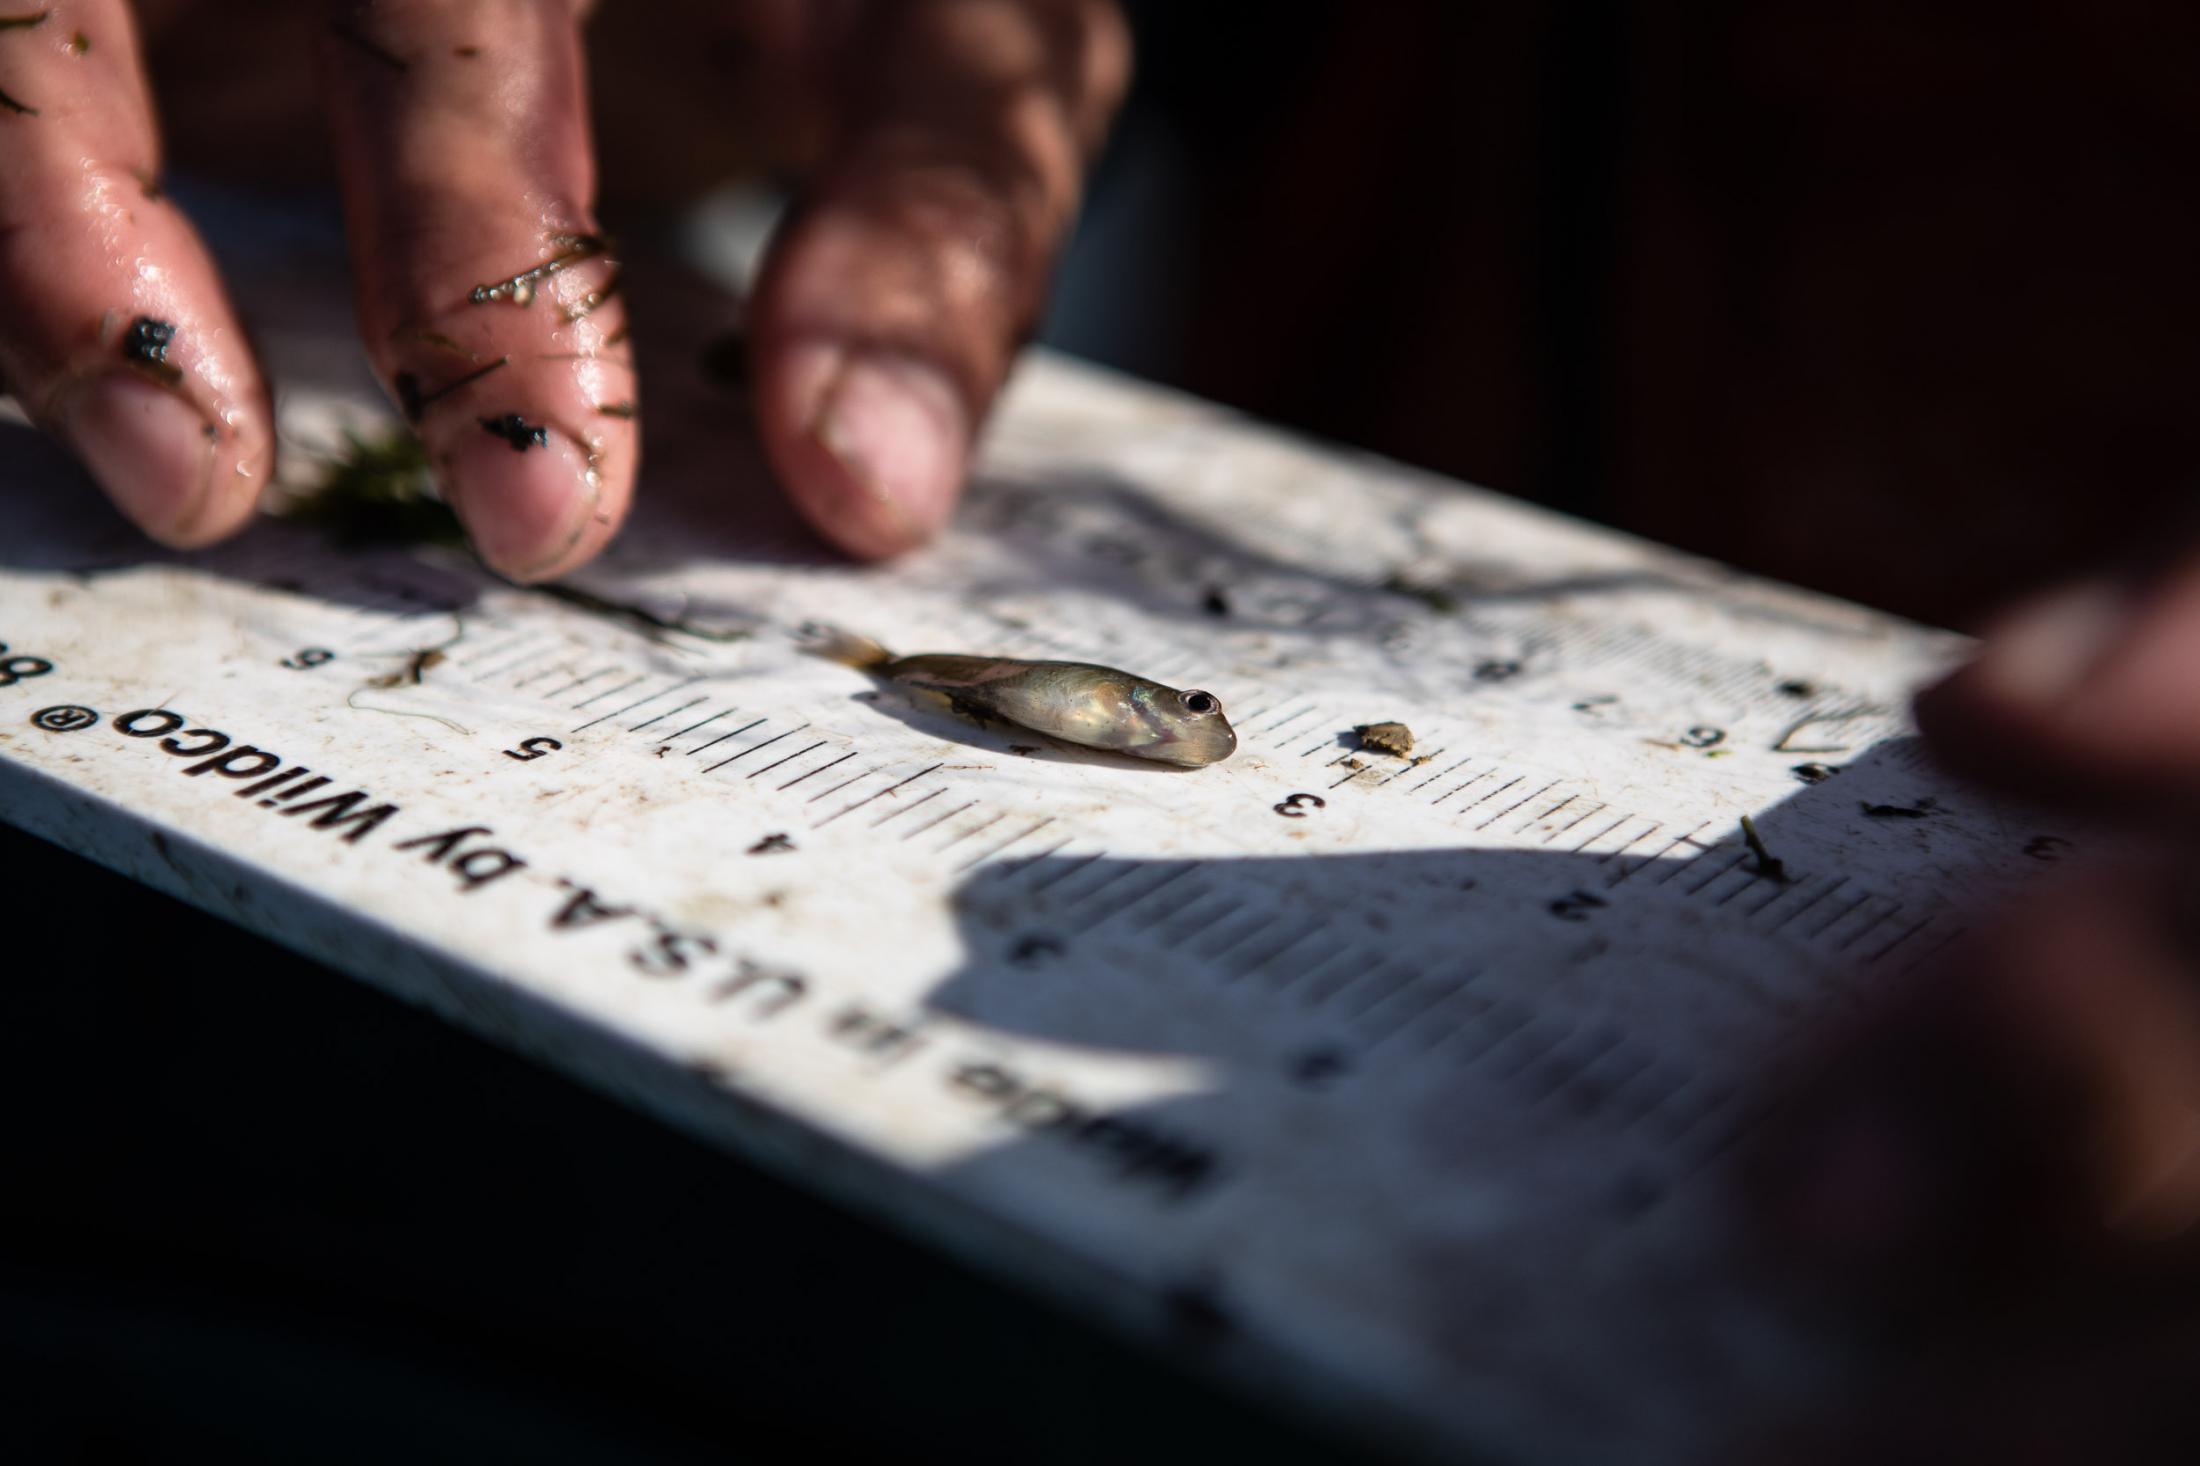  - The Delta  - A juvenile bluegill sunfish is measured and recorded.